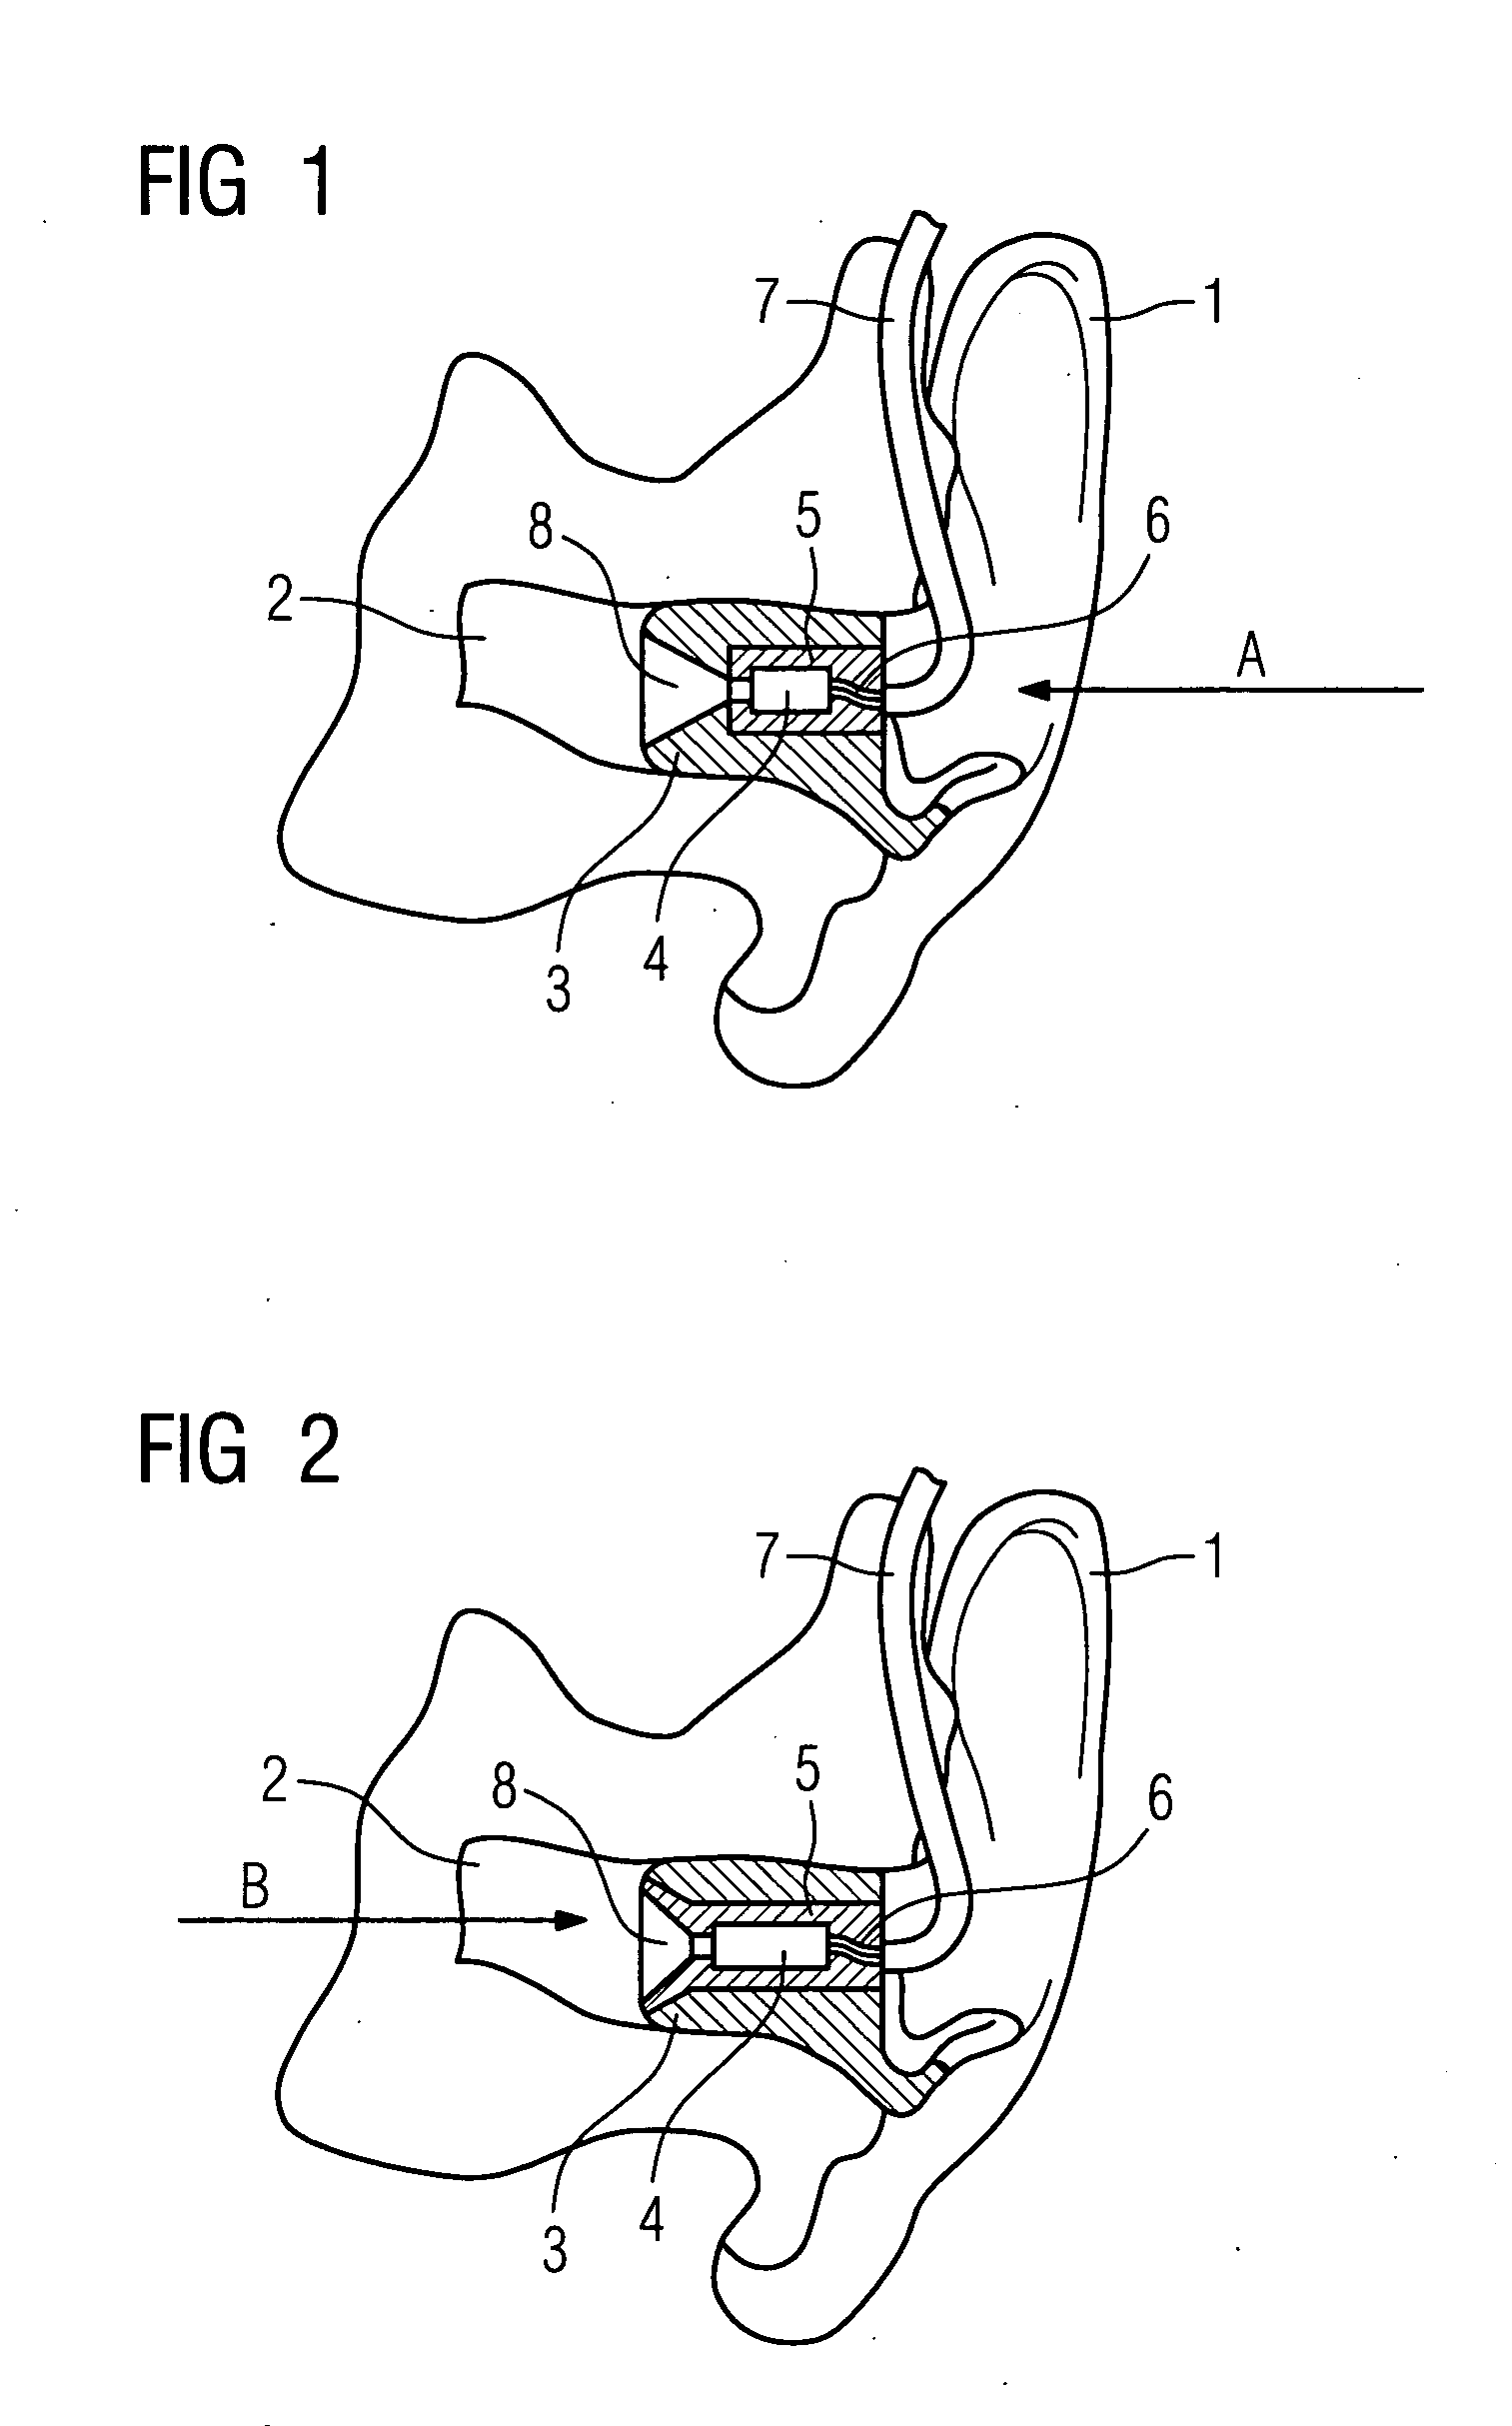 Ear insert for hearing aids